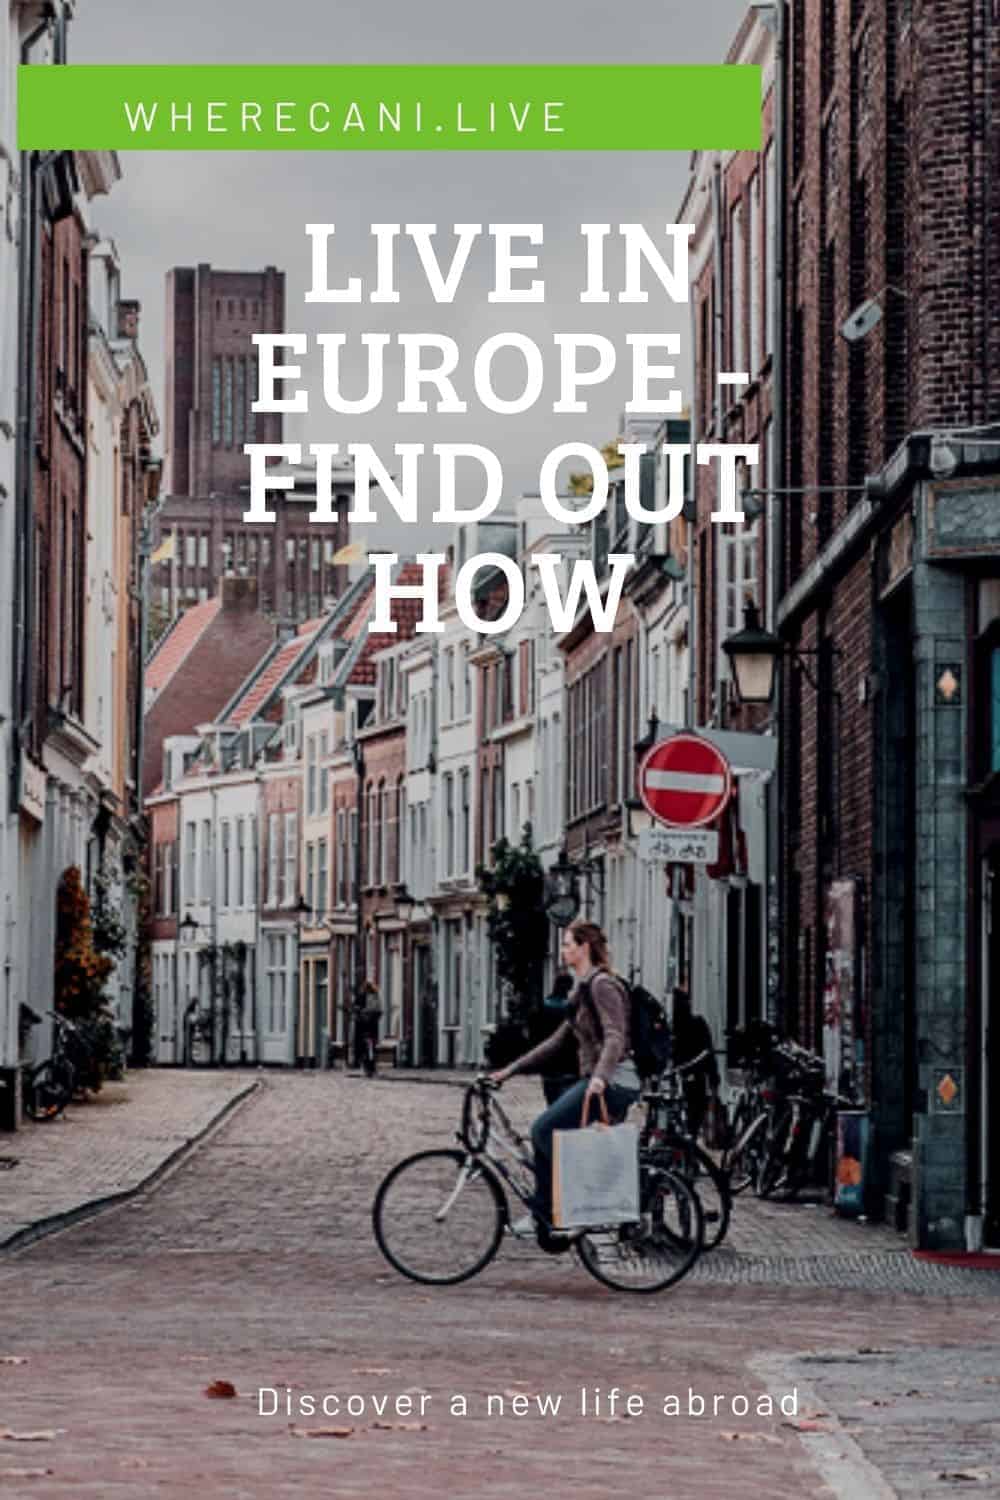 Who doesn't want to live in Europe for sometime in their life?  If that is you, find out how you can make your dream come true. #europe #moveabroad #liveabroad #visas via @wherecanilive